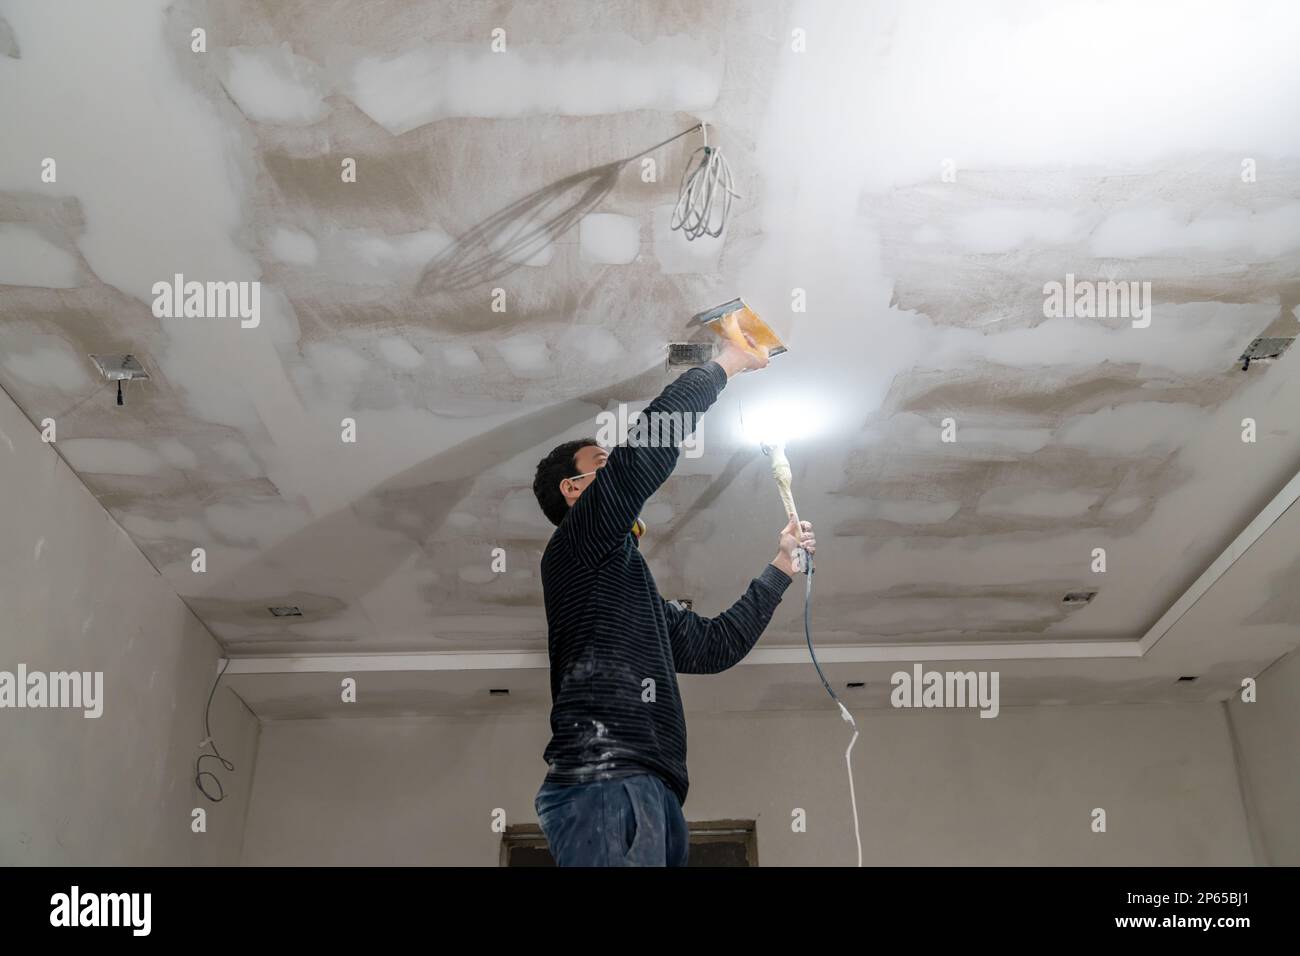 hand sanding of the plasterboard ceiling with a trowel Stock Photo